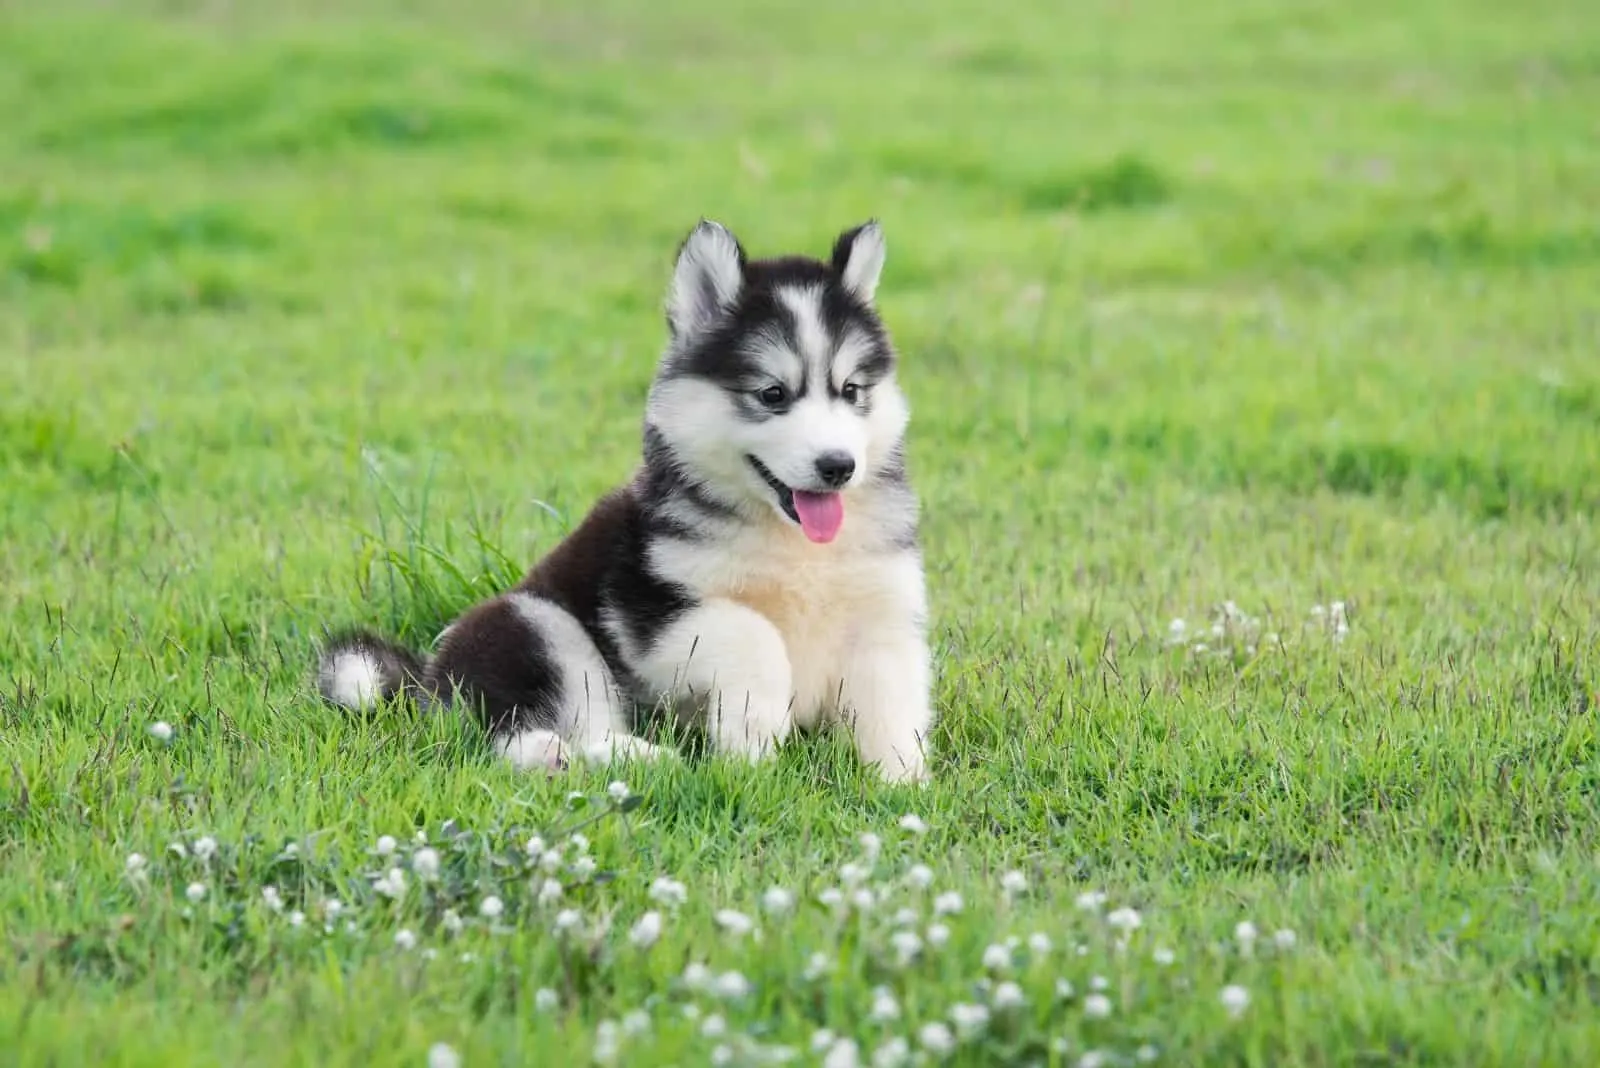 cute siberian husky playing on the grass lawn